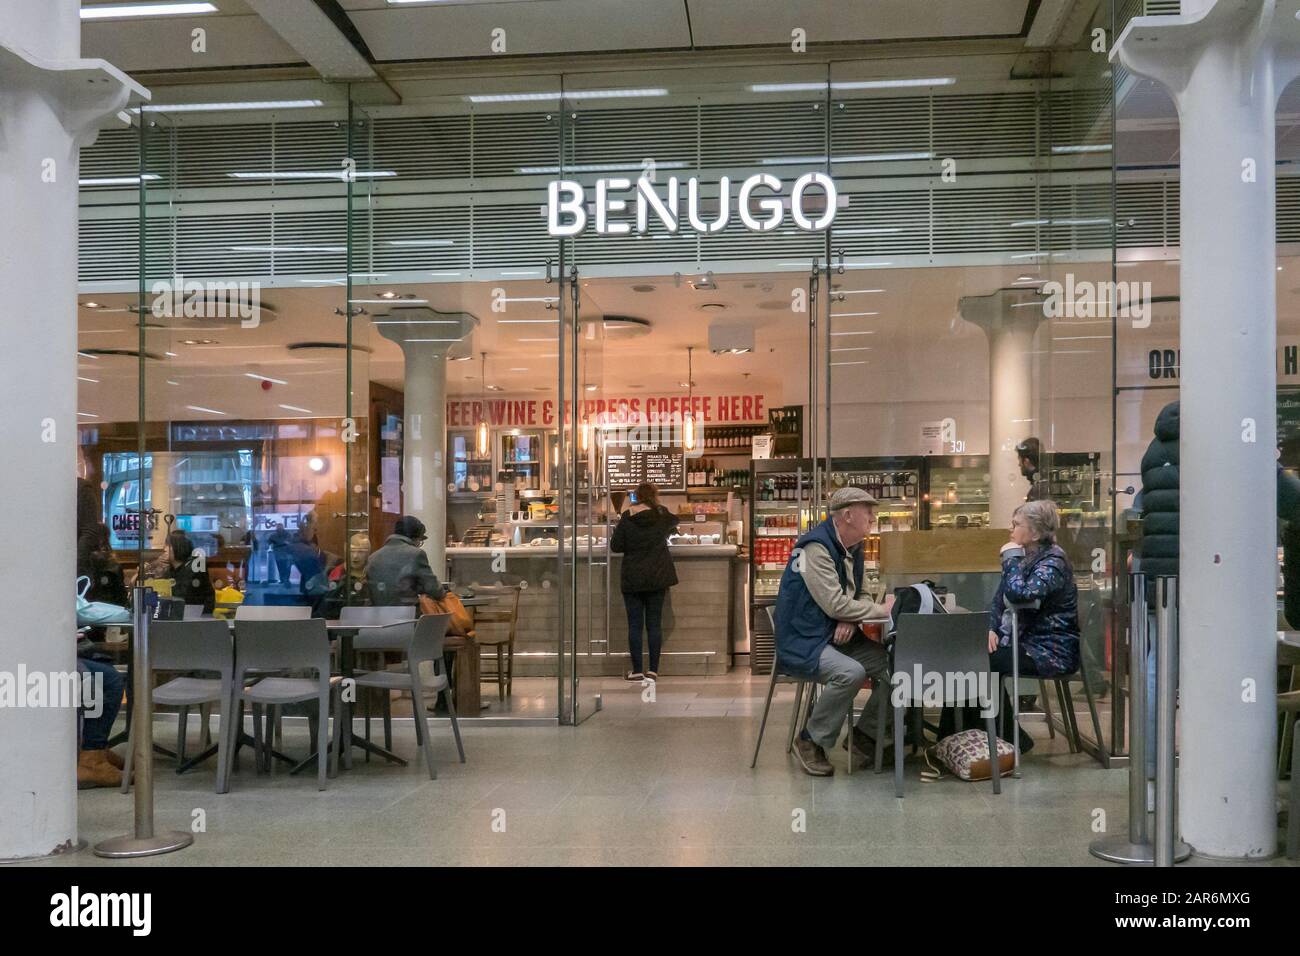 Benugo,St Pancras Statio,London,Modern chain cafe serving create-your-own sandwiches, salads and wraps, plus cakes Stock Photo